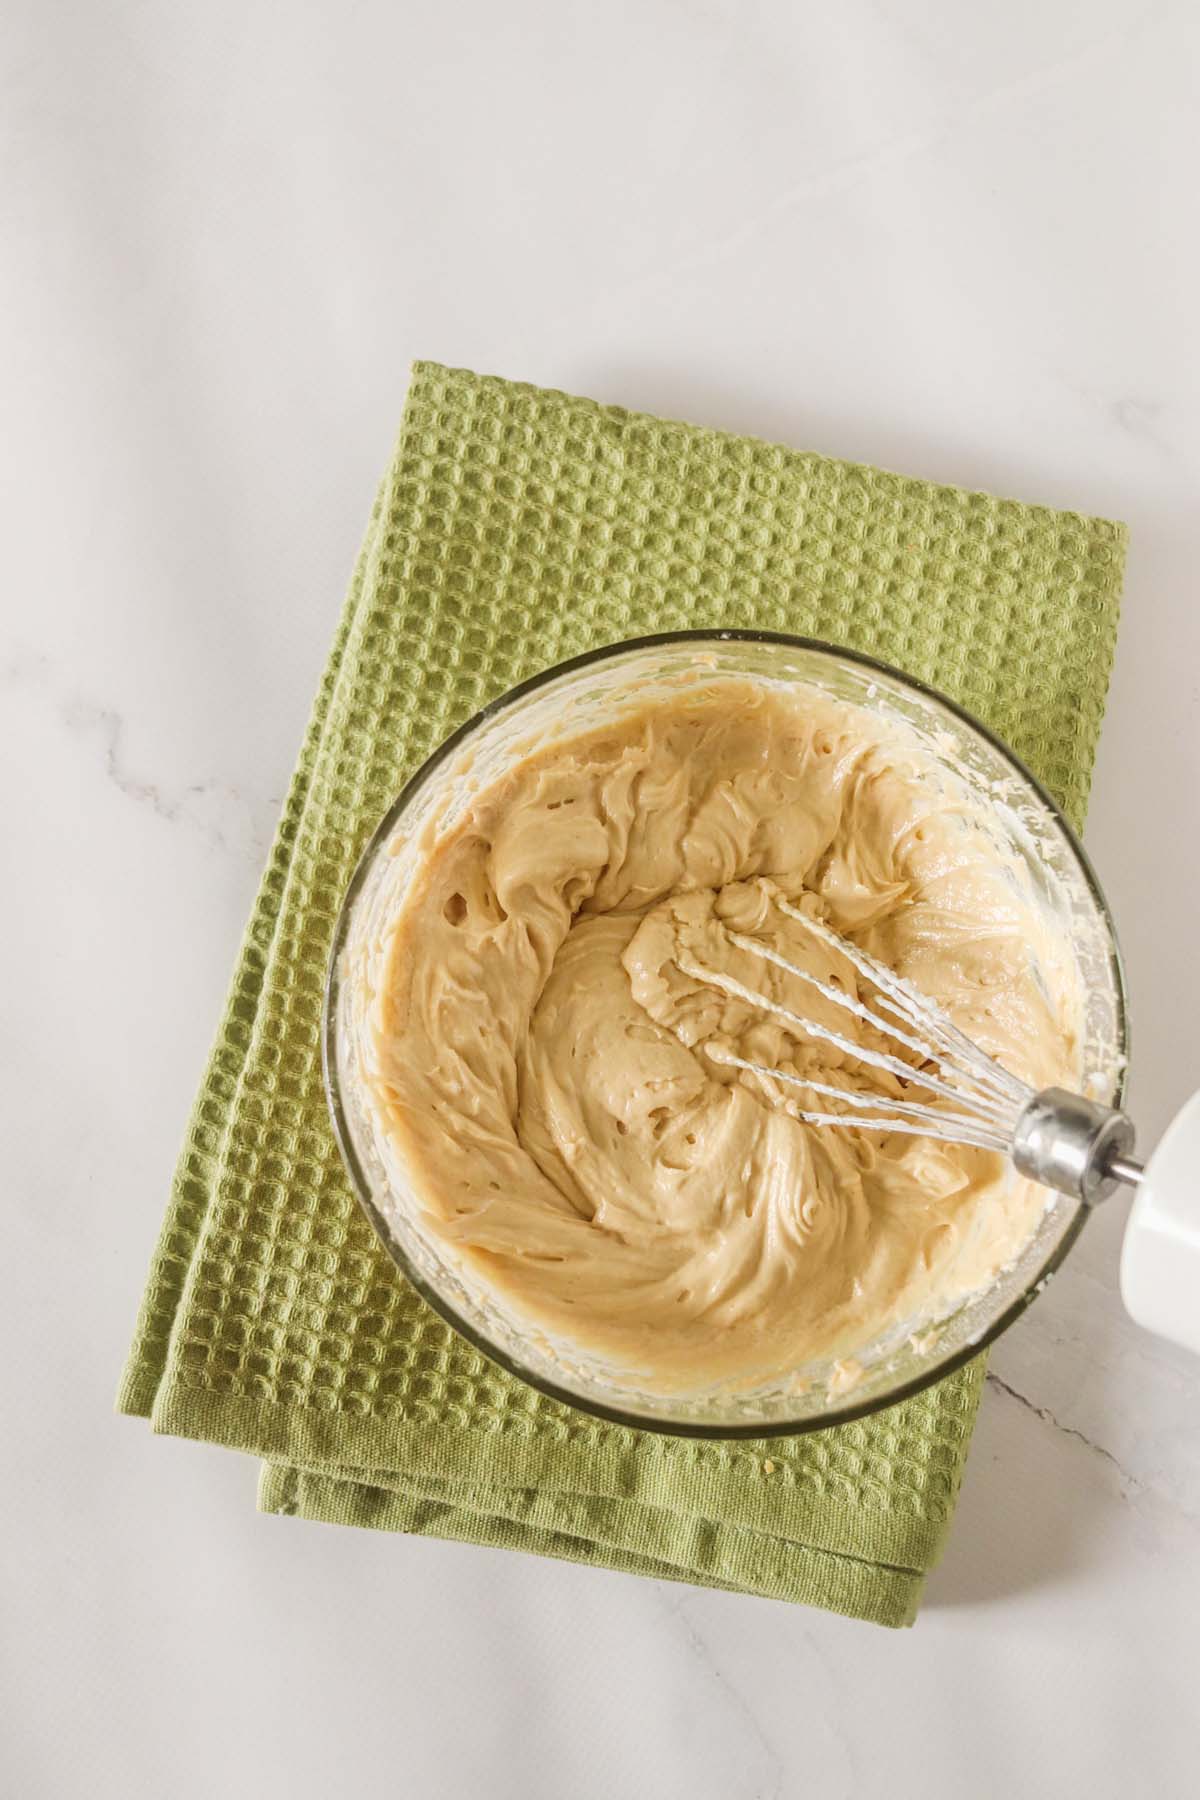 Whipped peanut butter in a mixing bowl with a whisk.